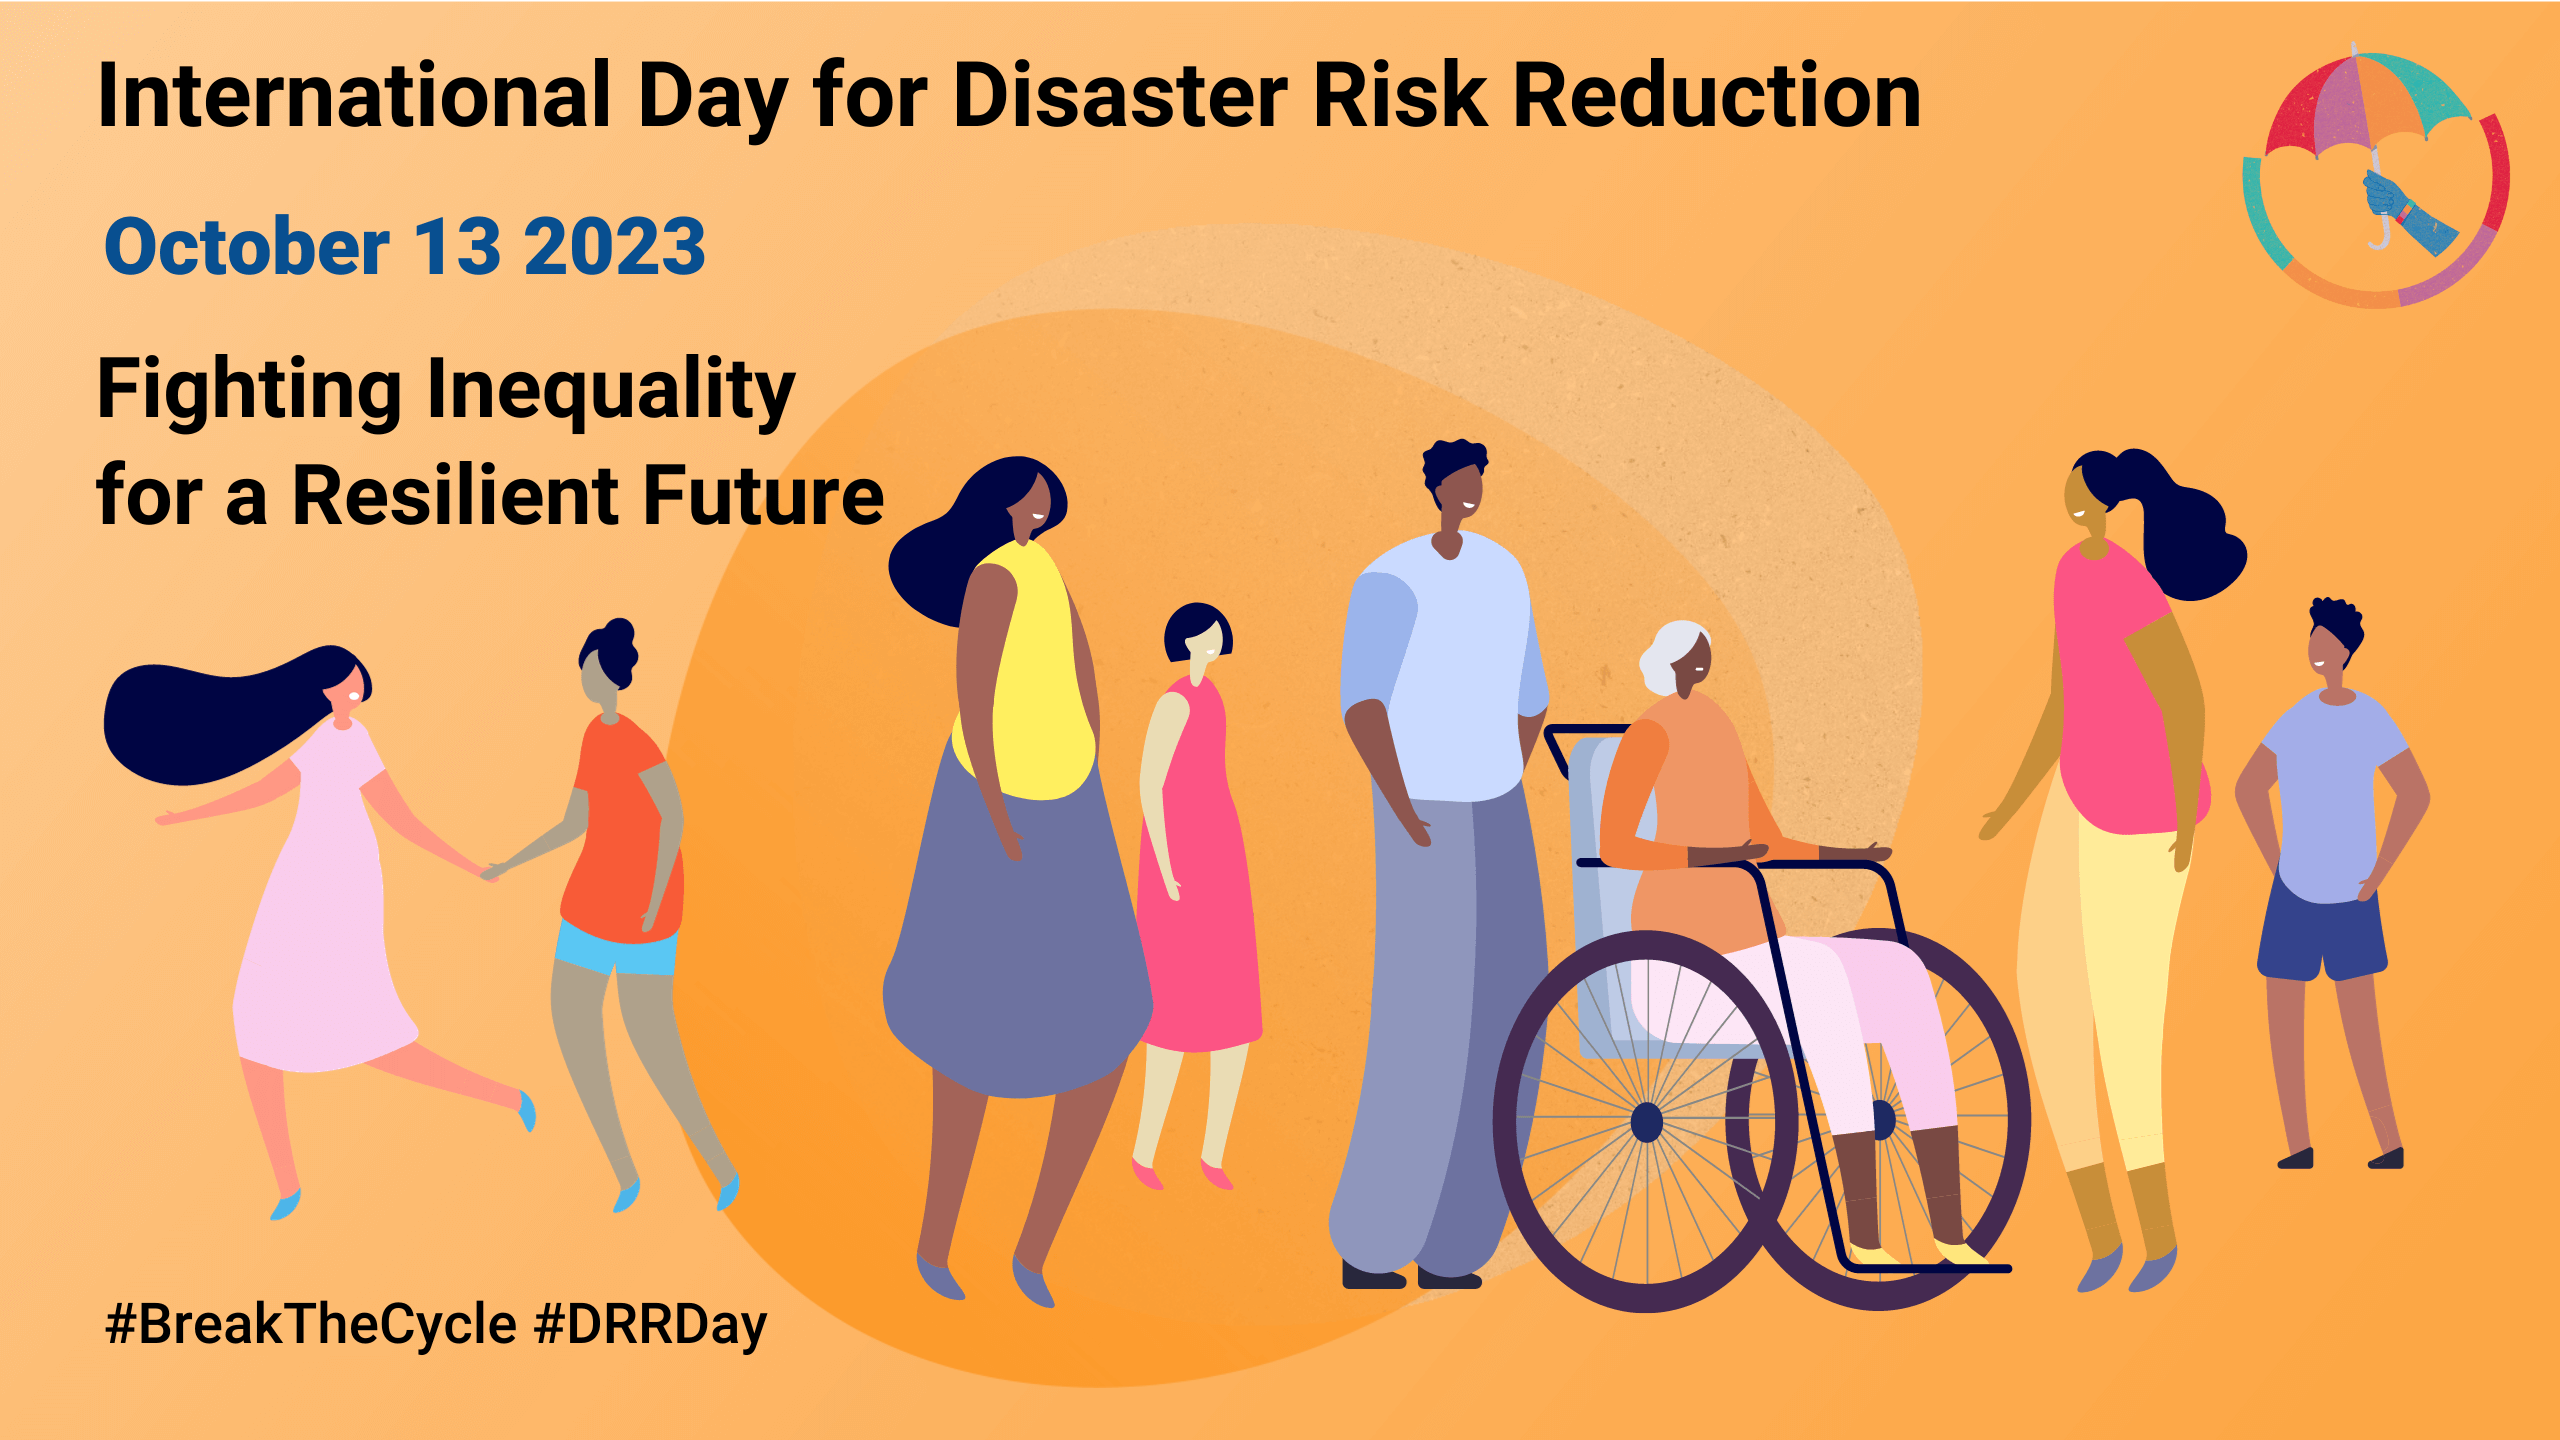 Today is the International Day for Disaster Risk Reduction!